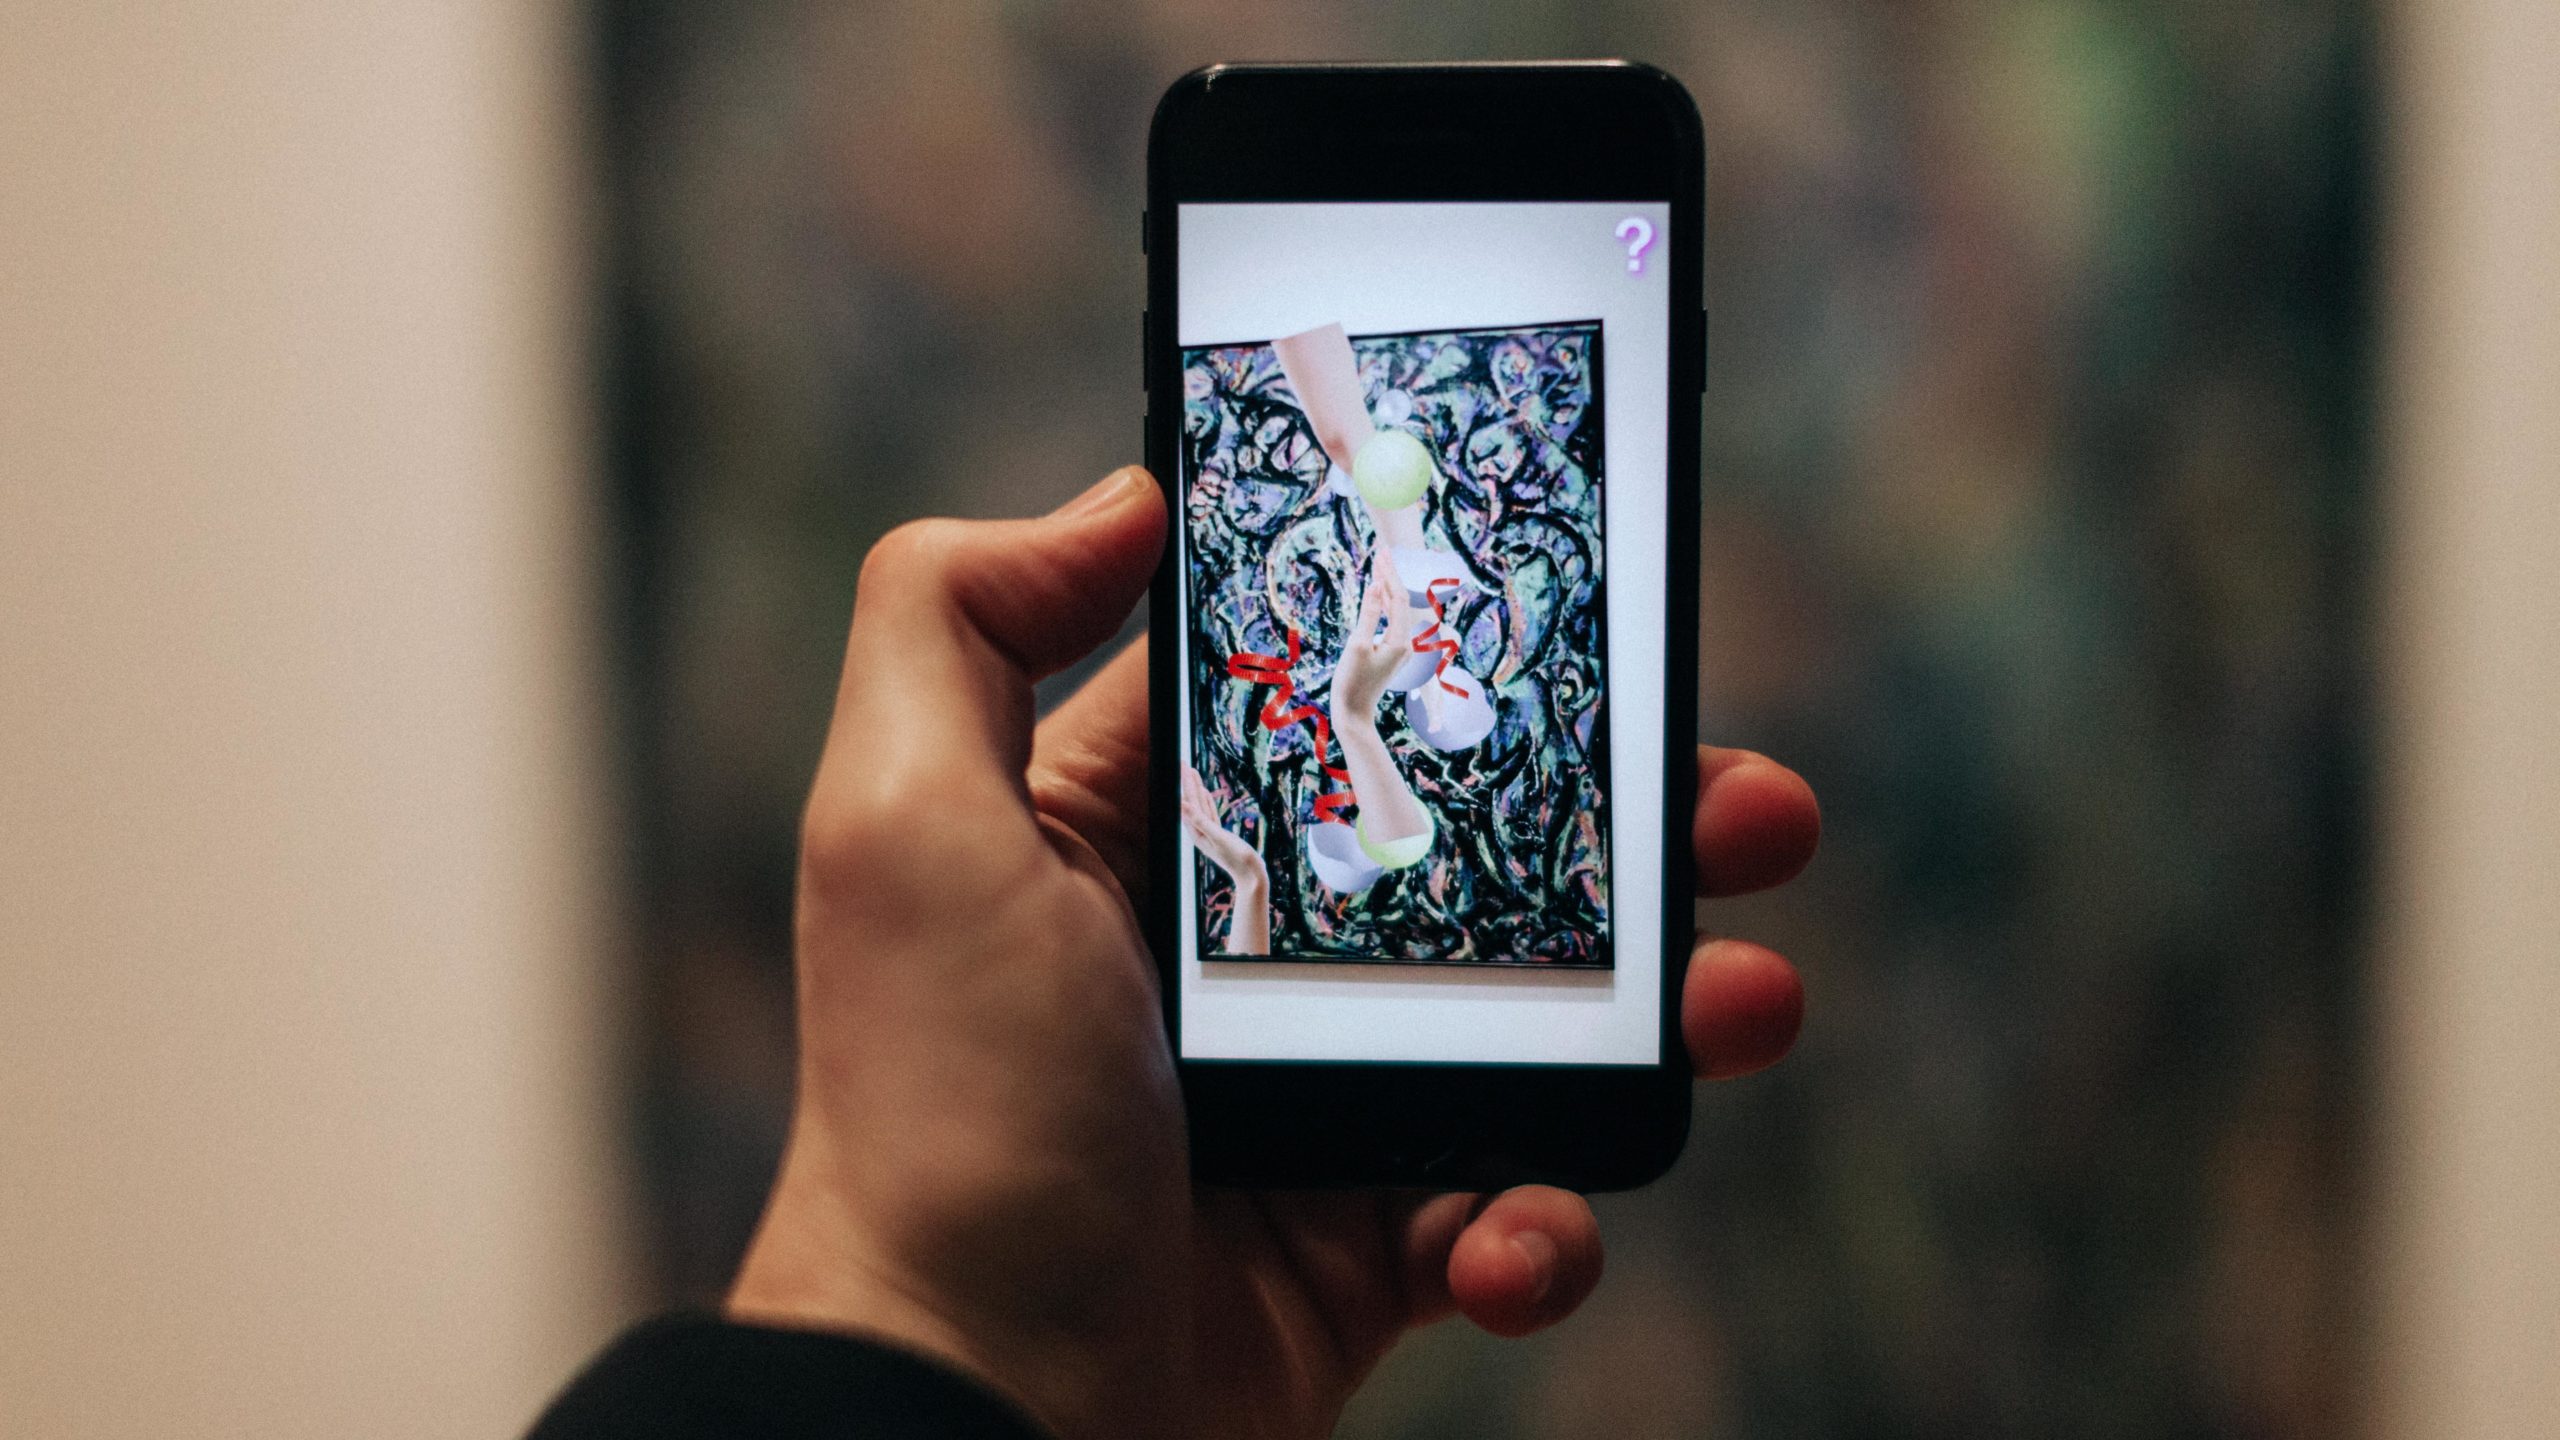 Artists Protest Elite Art World With Unauthorised AR Gallery At The MoMA